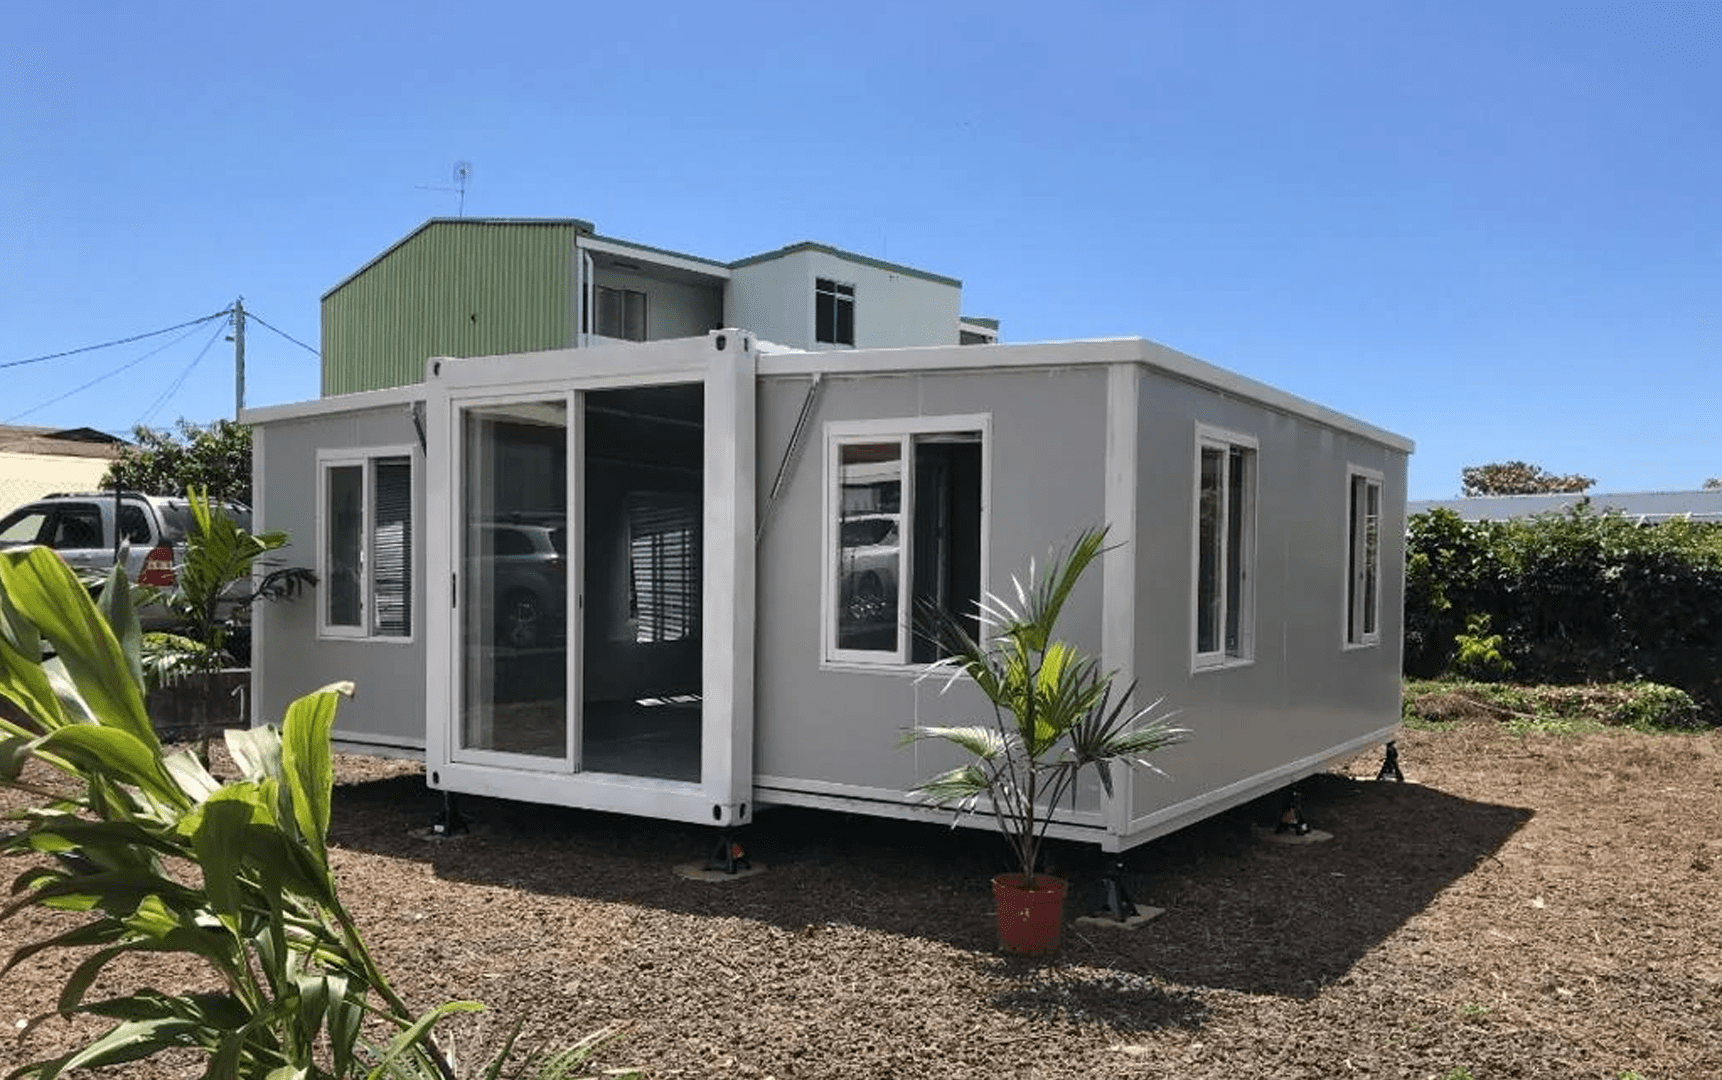 Sell expandable modular homes/houses, modern box house, modular kit home, modular tiny house, modular pod, best mobile homes, moveable manufactured homes Indonesia best price.